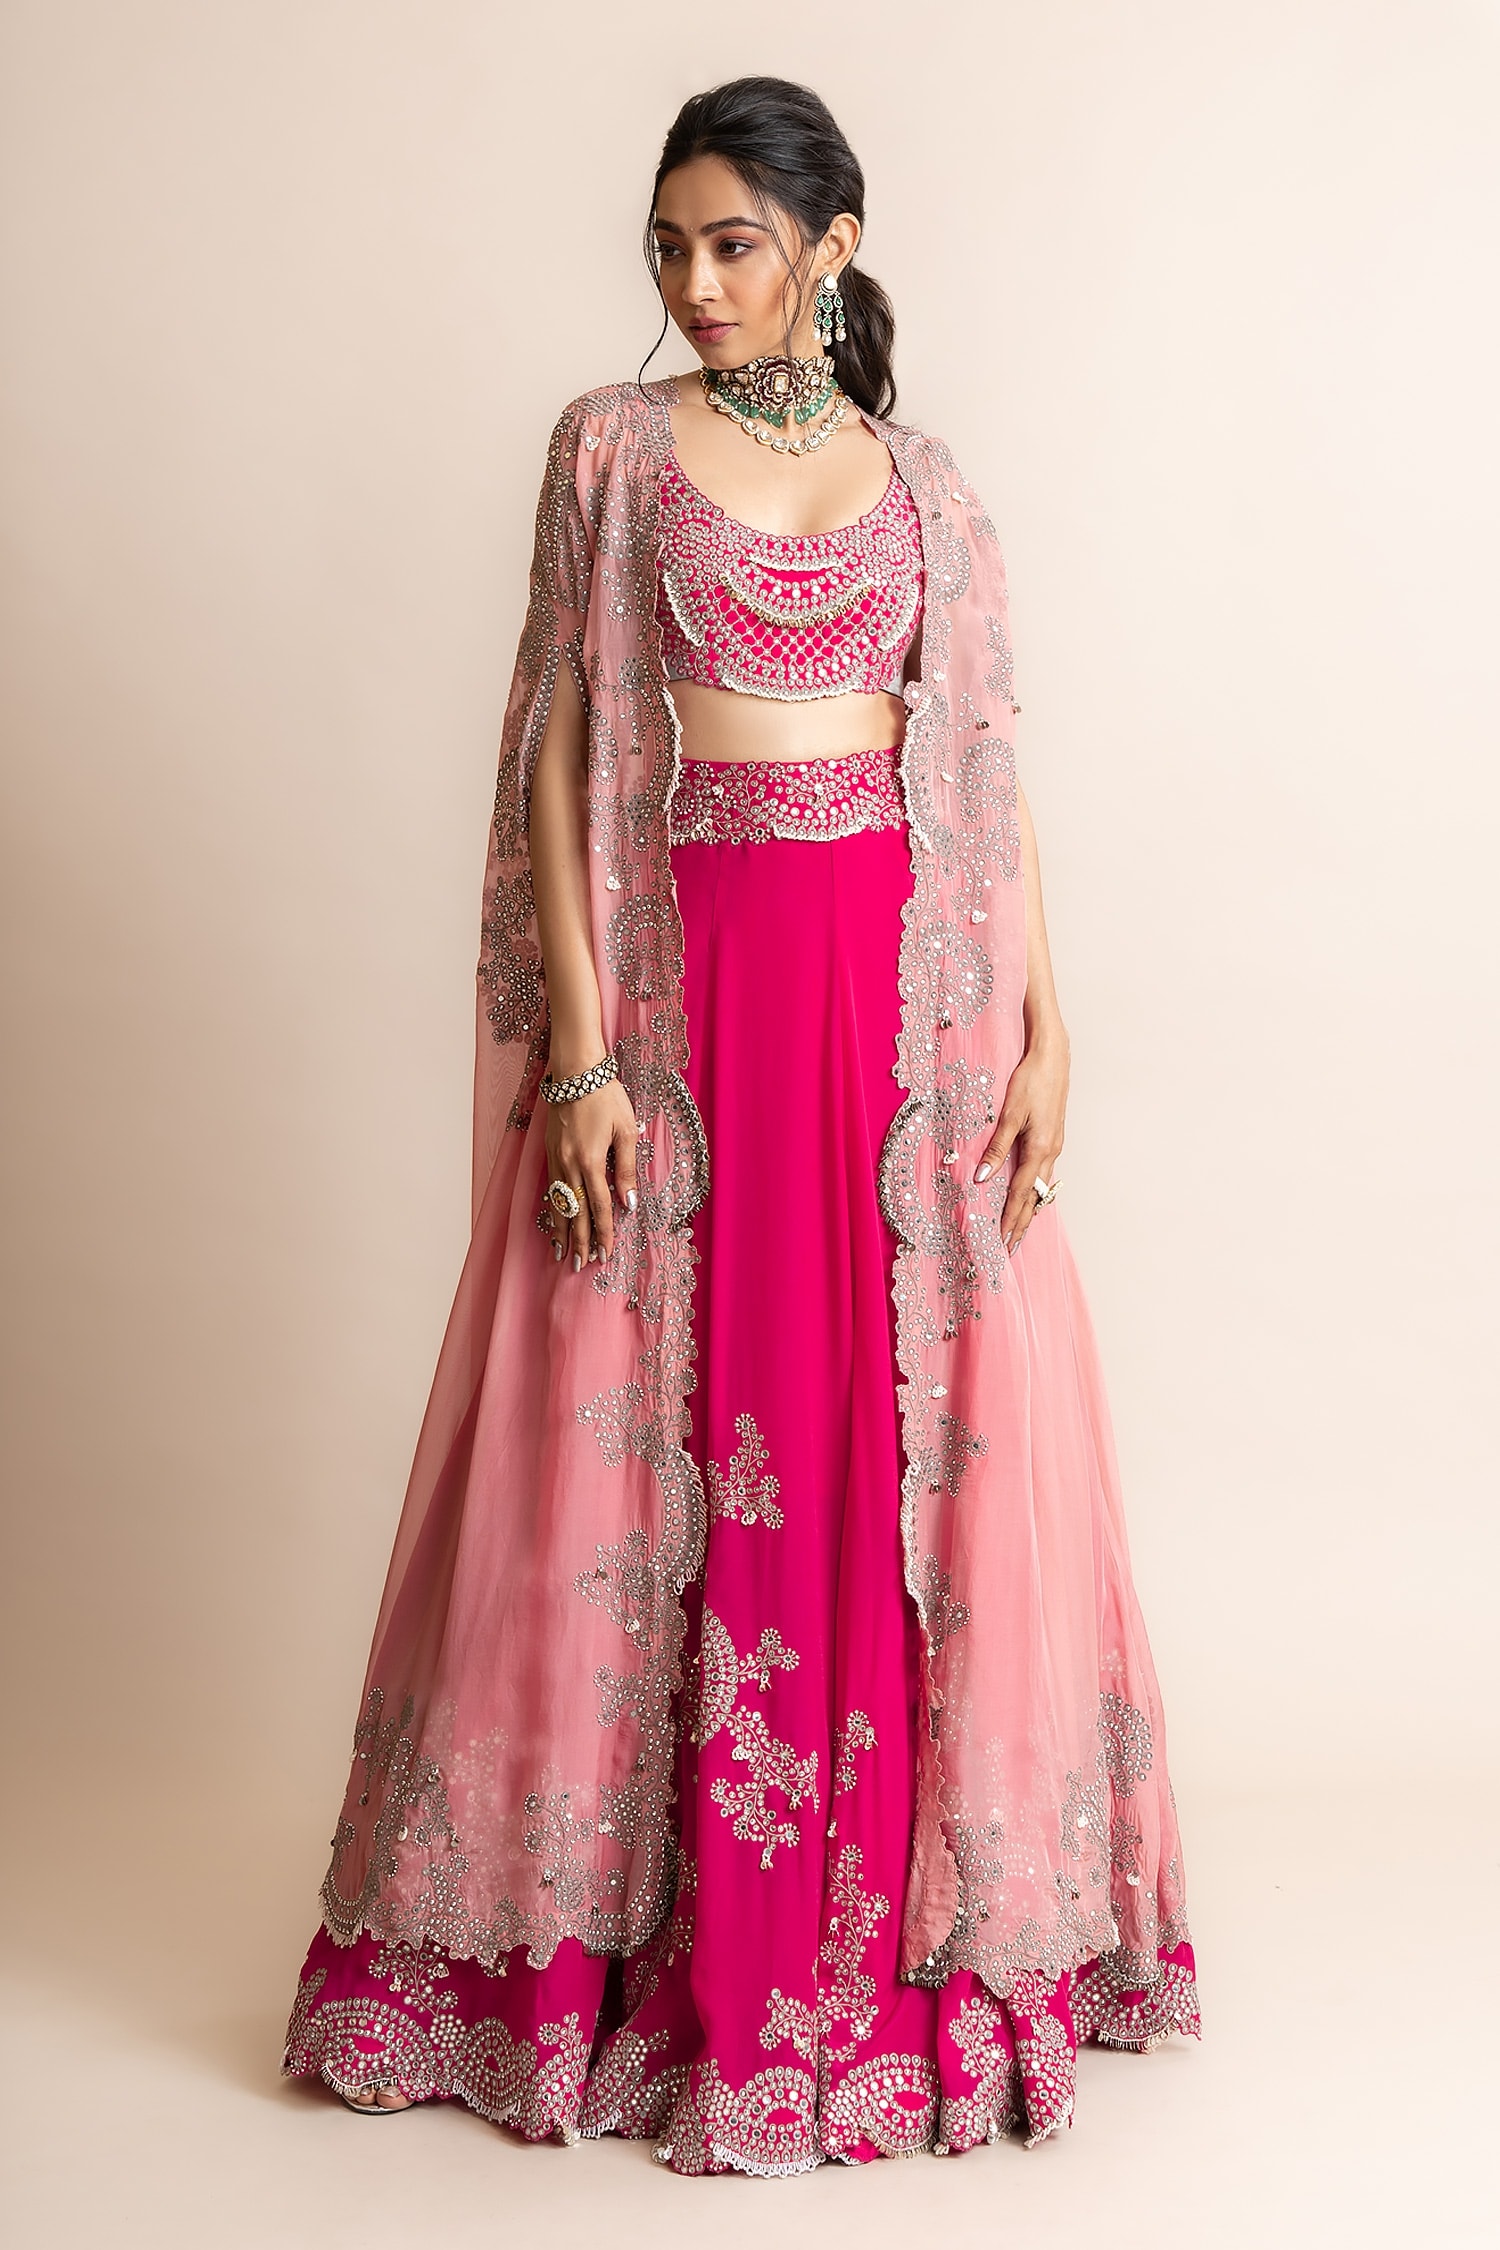 Nupur Kanoi Fuchsia Organza- Georgette Embroidery Floral Lehenga With Long Cape For Women